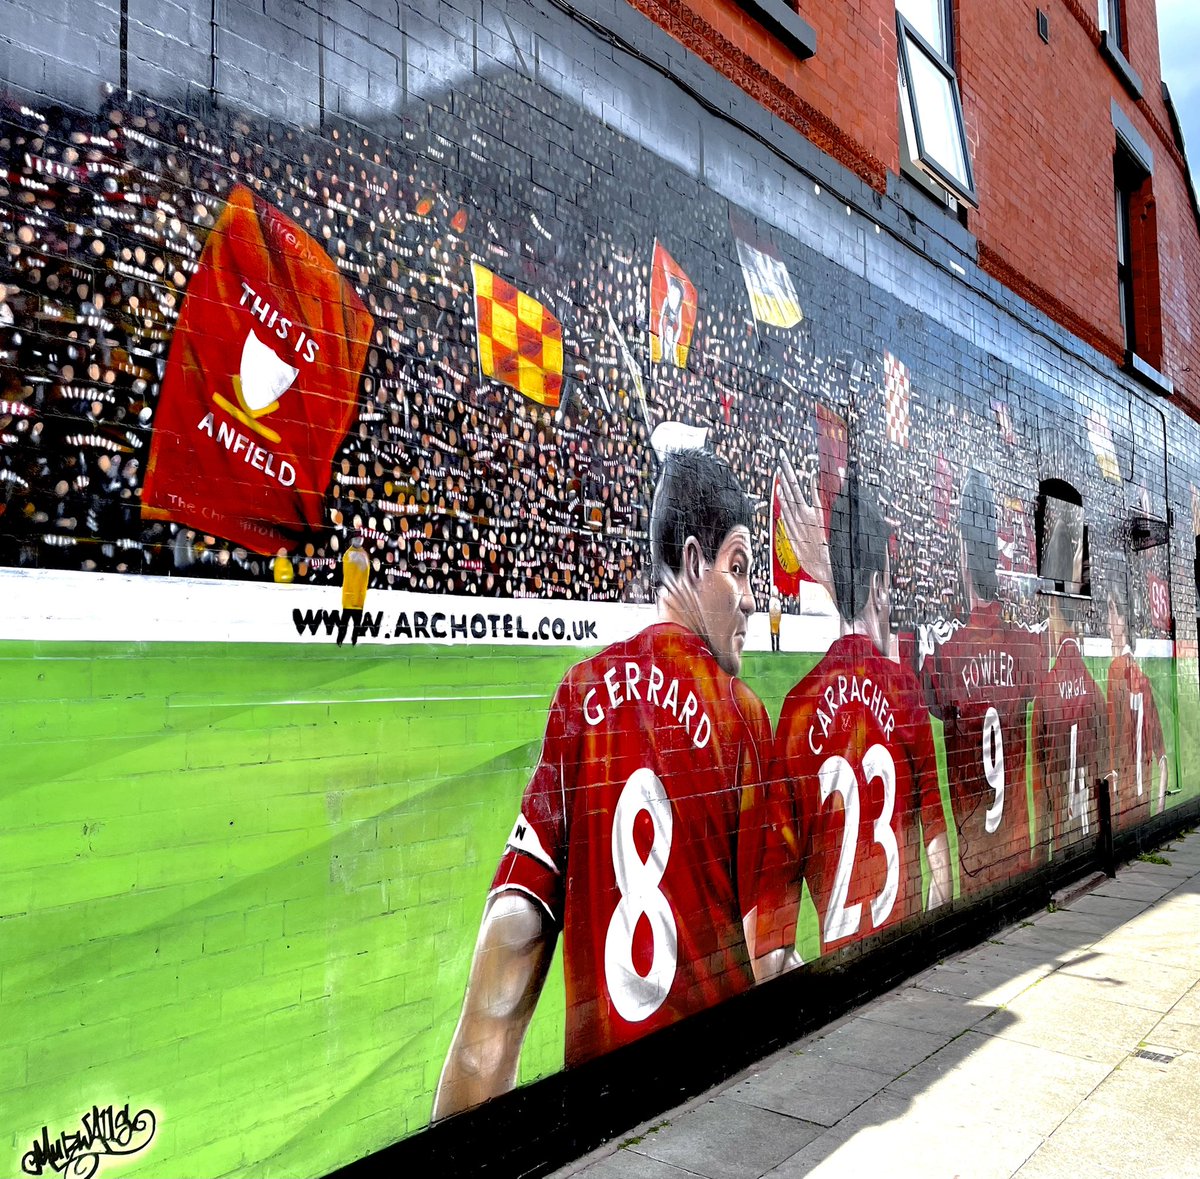 Bumped into this mural before the merseyside derby. Gorgeous! #gerrard @Carra23 @Robbie9Fowler @VirgilvDijk @kennethdalglish